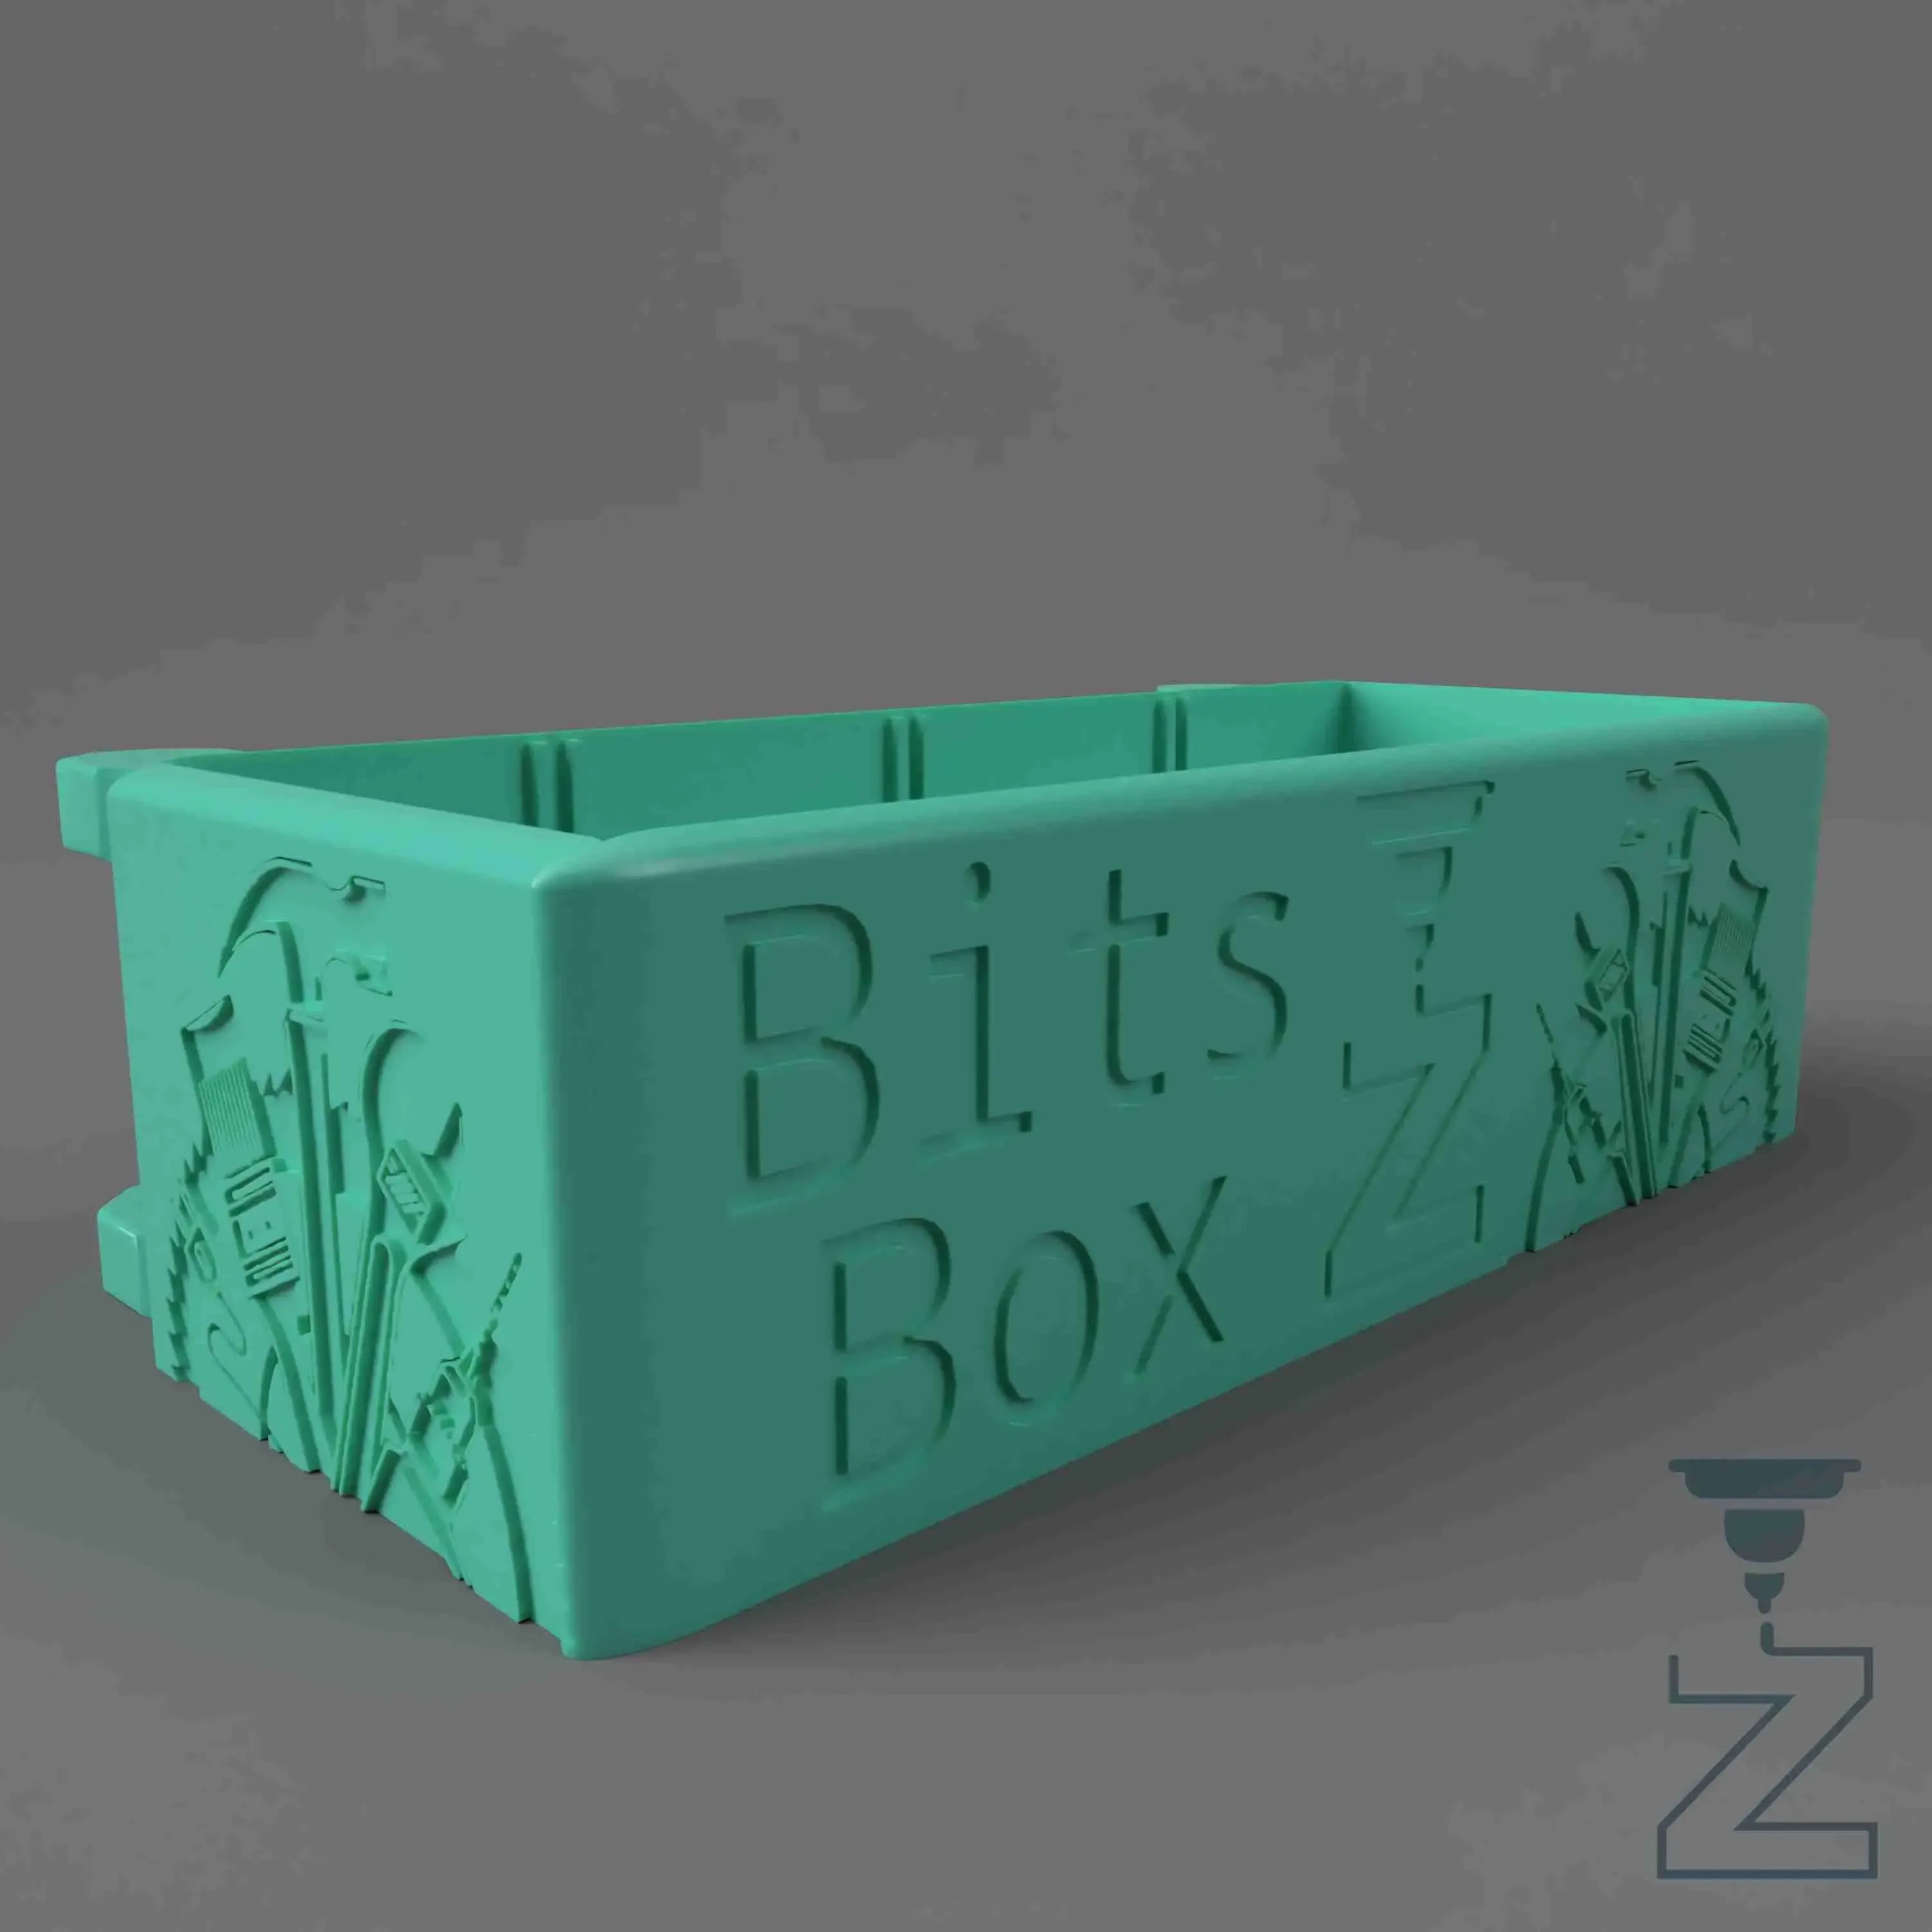 Bits Box - A Desk Mounted Handy Storage Container + Dividers